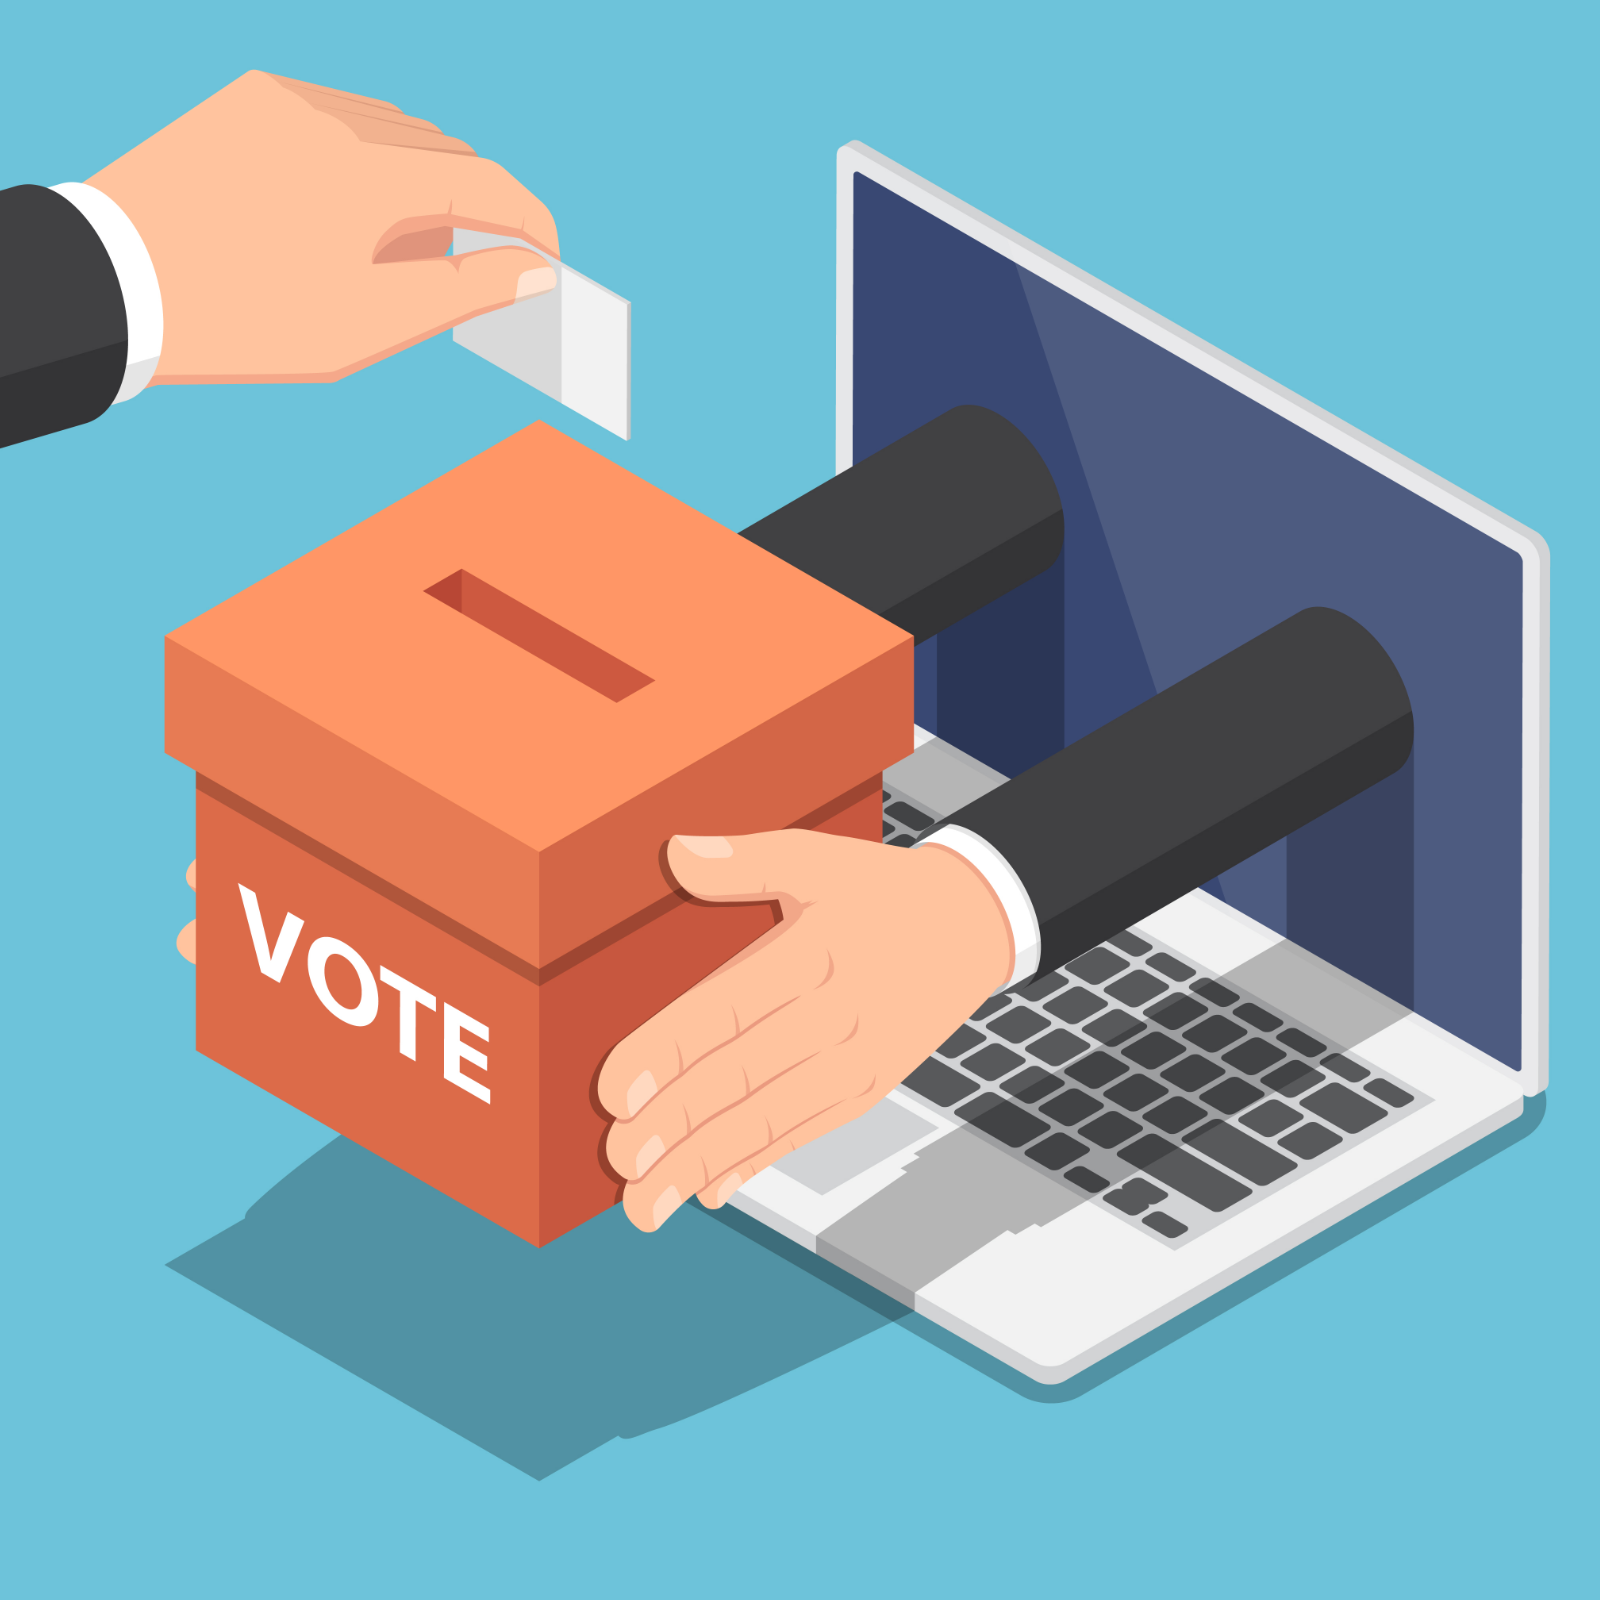 Bithumb Launches Voting Platform to Screen New Cryptocurrencies